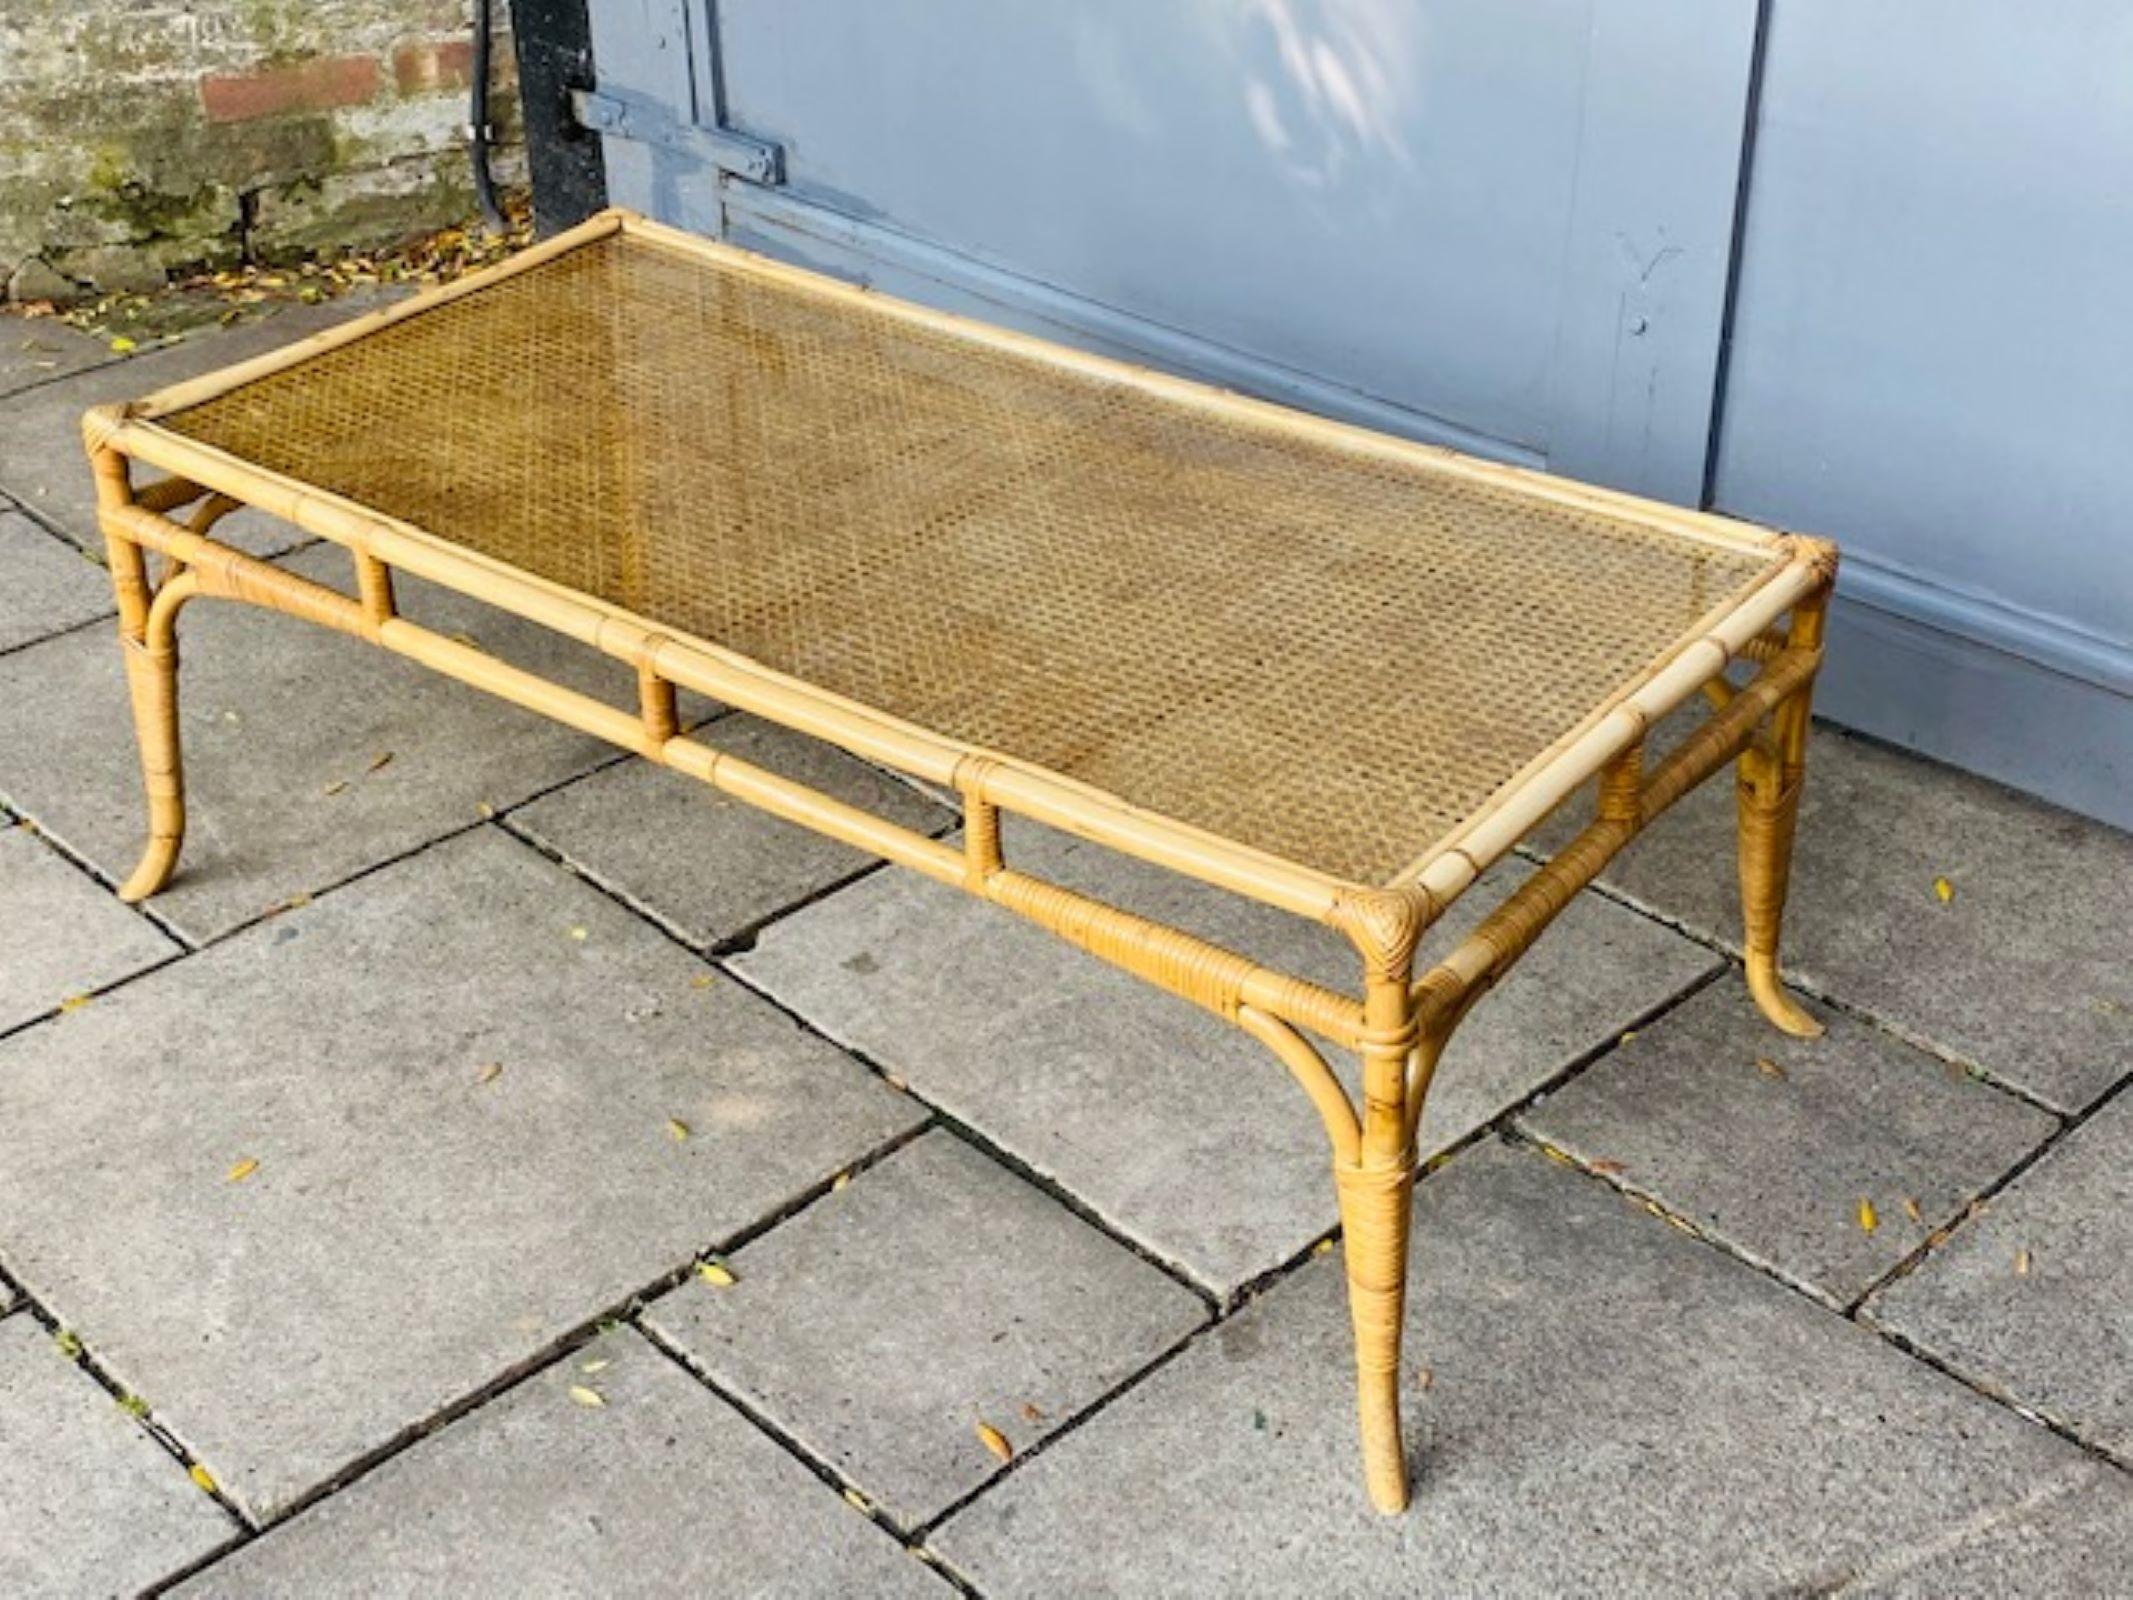 Mid Century Rattan and Bamboo Coffee Table with Glass Top, Italian, 1970

Mid Century Rectangular Rattan and Glass Top Coffee / Lounge Table
This large rattan coffee table has four legs which splay out slightly at the feet. The top has cane weave